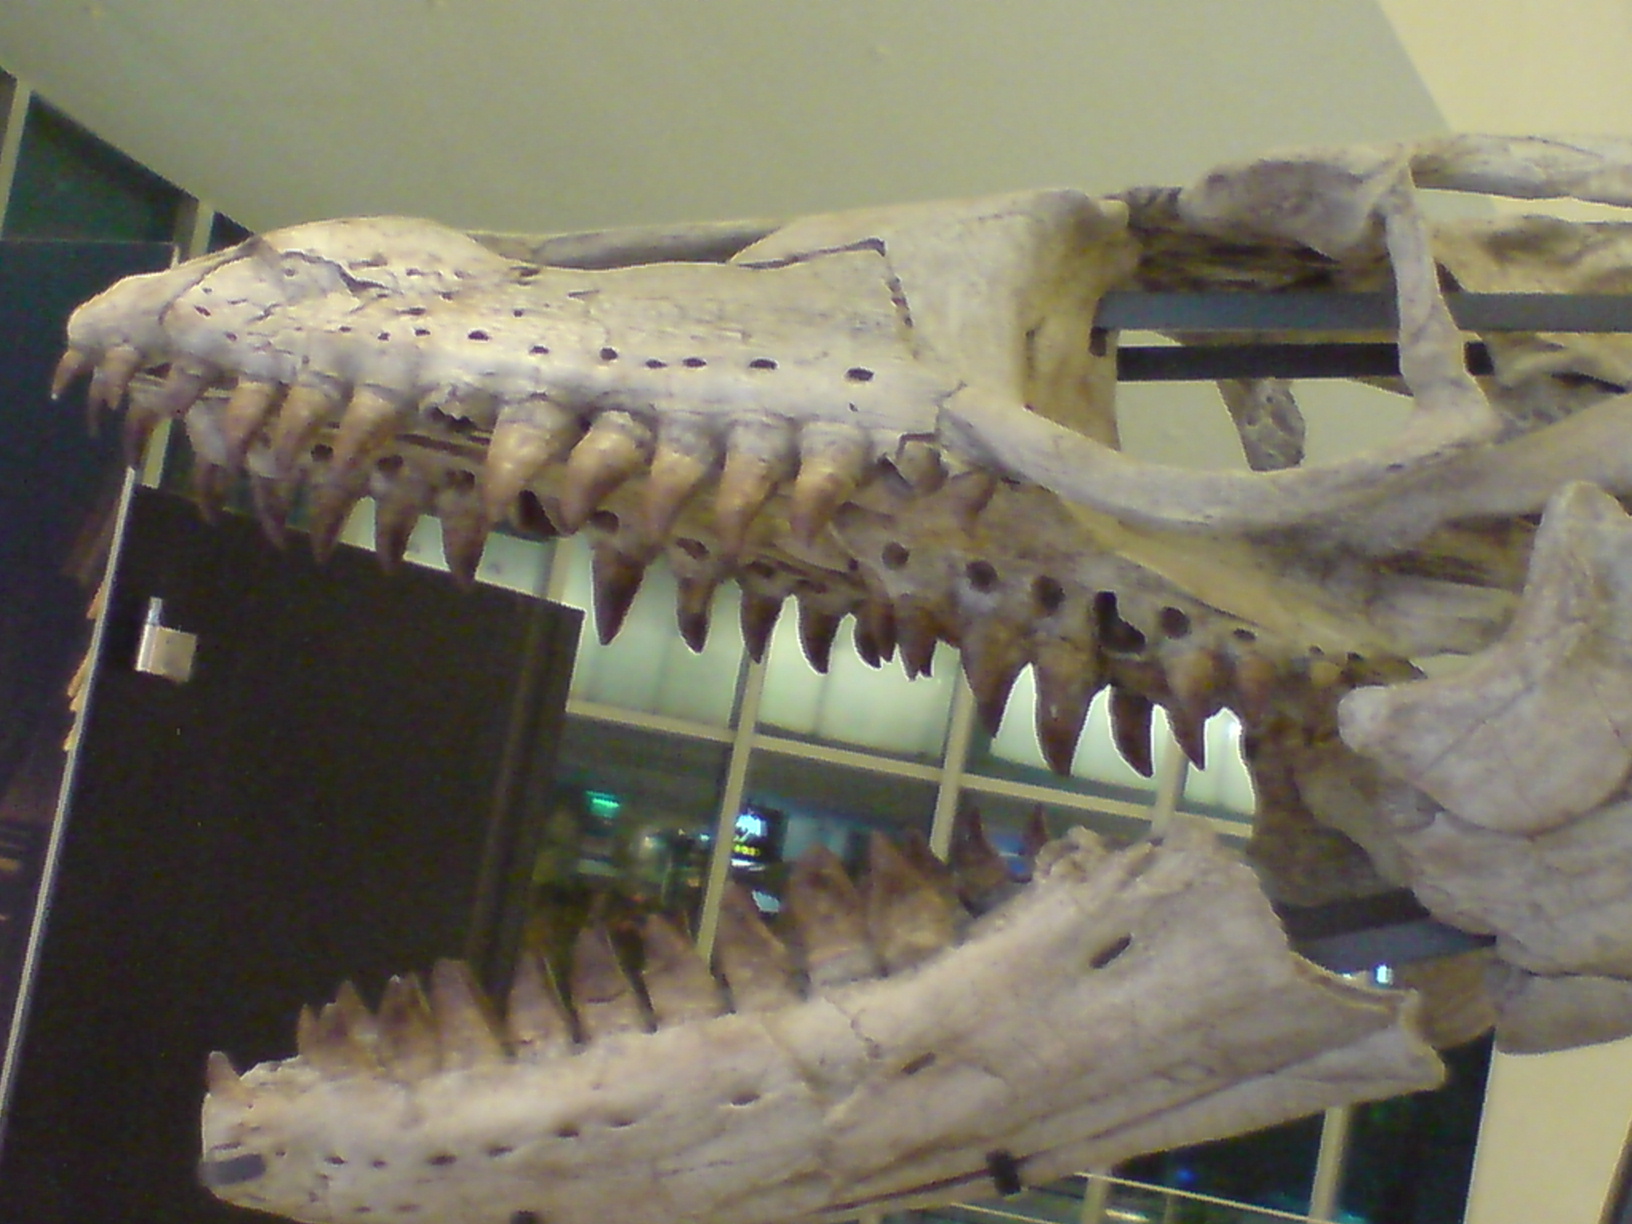 a museum display of dinosaurs with teeth and mouths